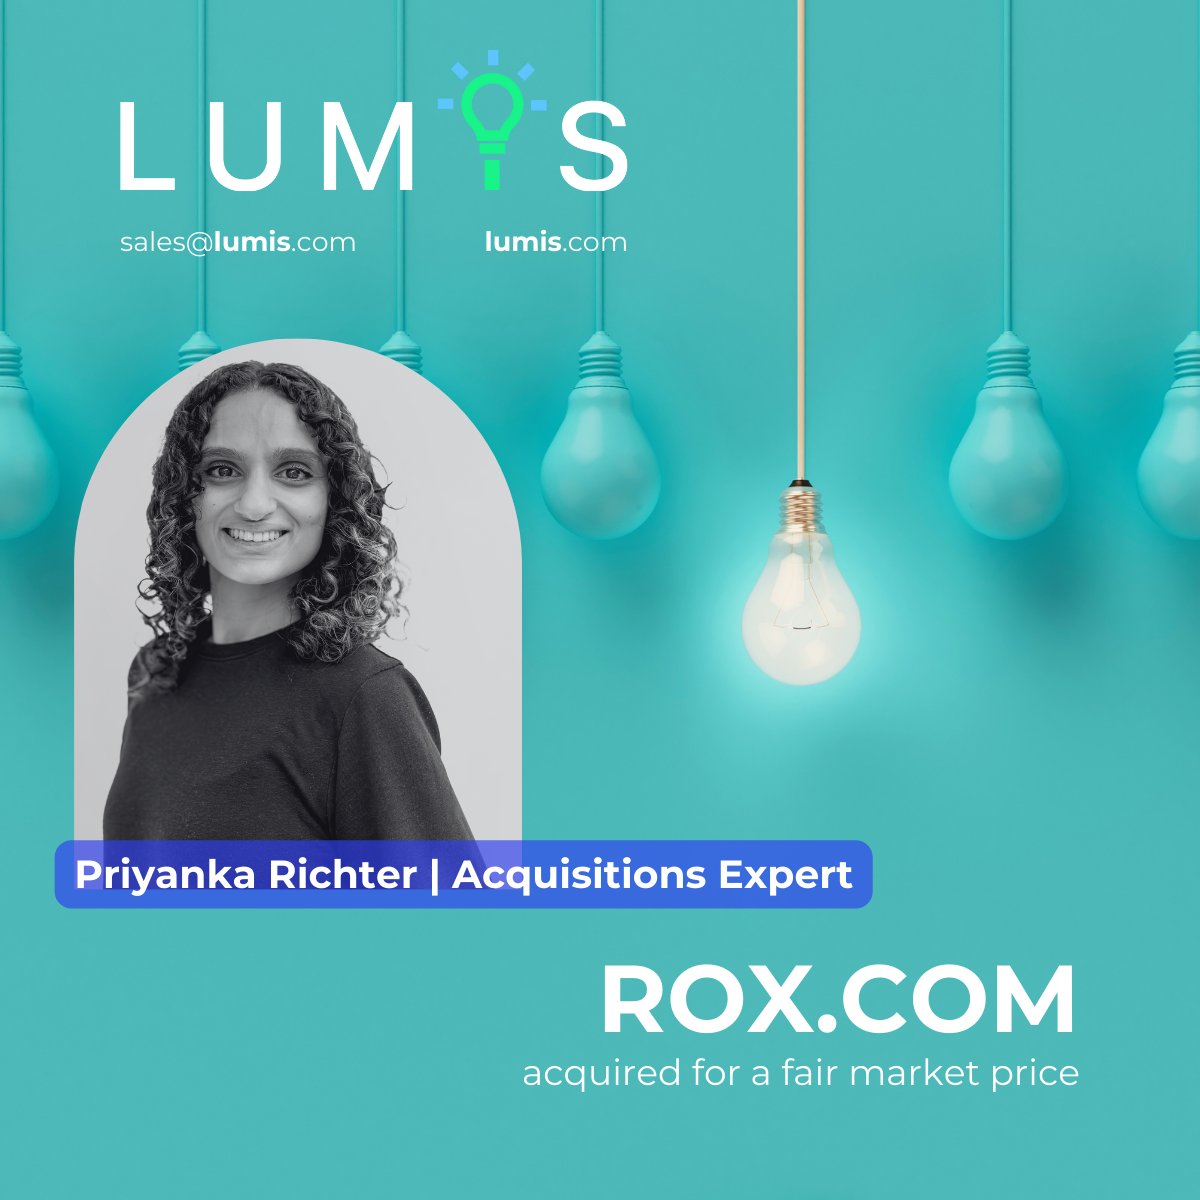 Rox.com has been acquired. 

Killer domain! Congrats to our client. 

#Lumis